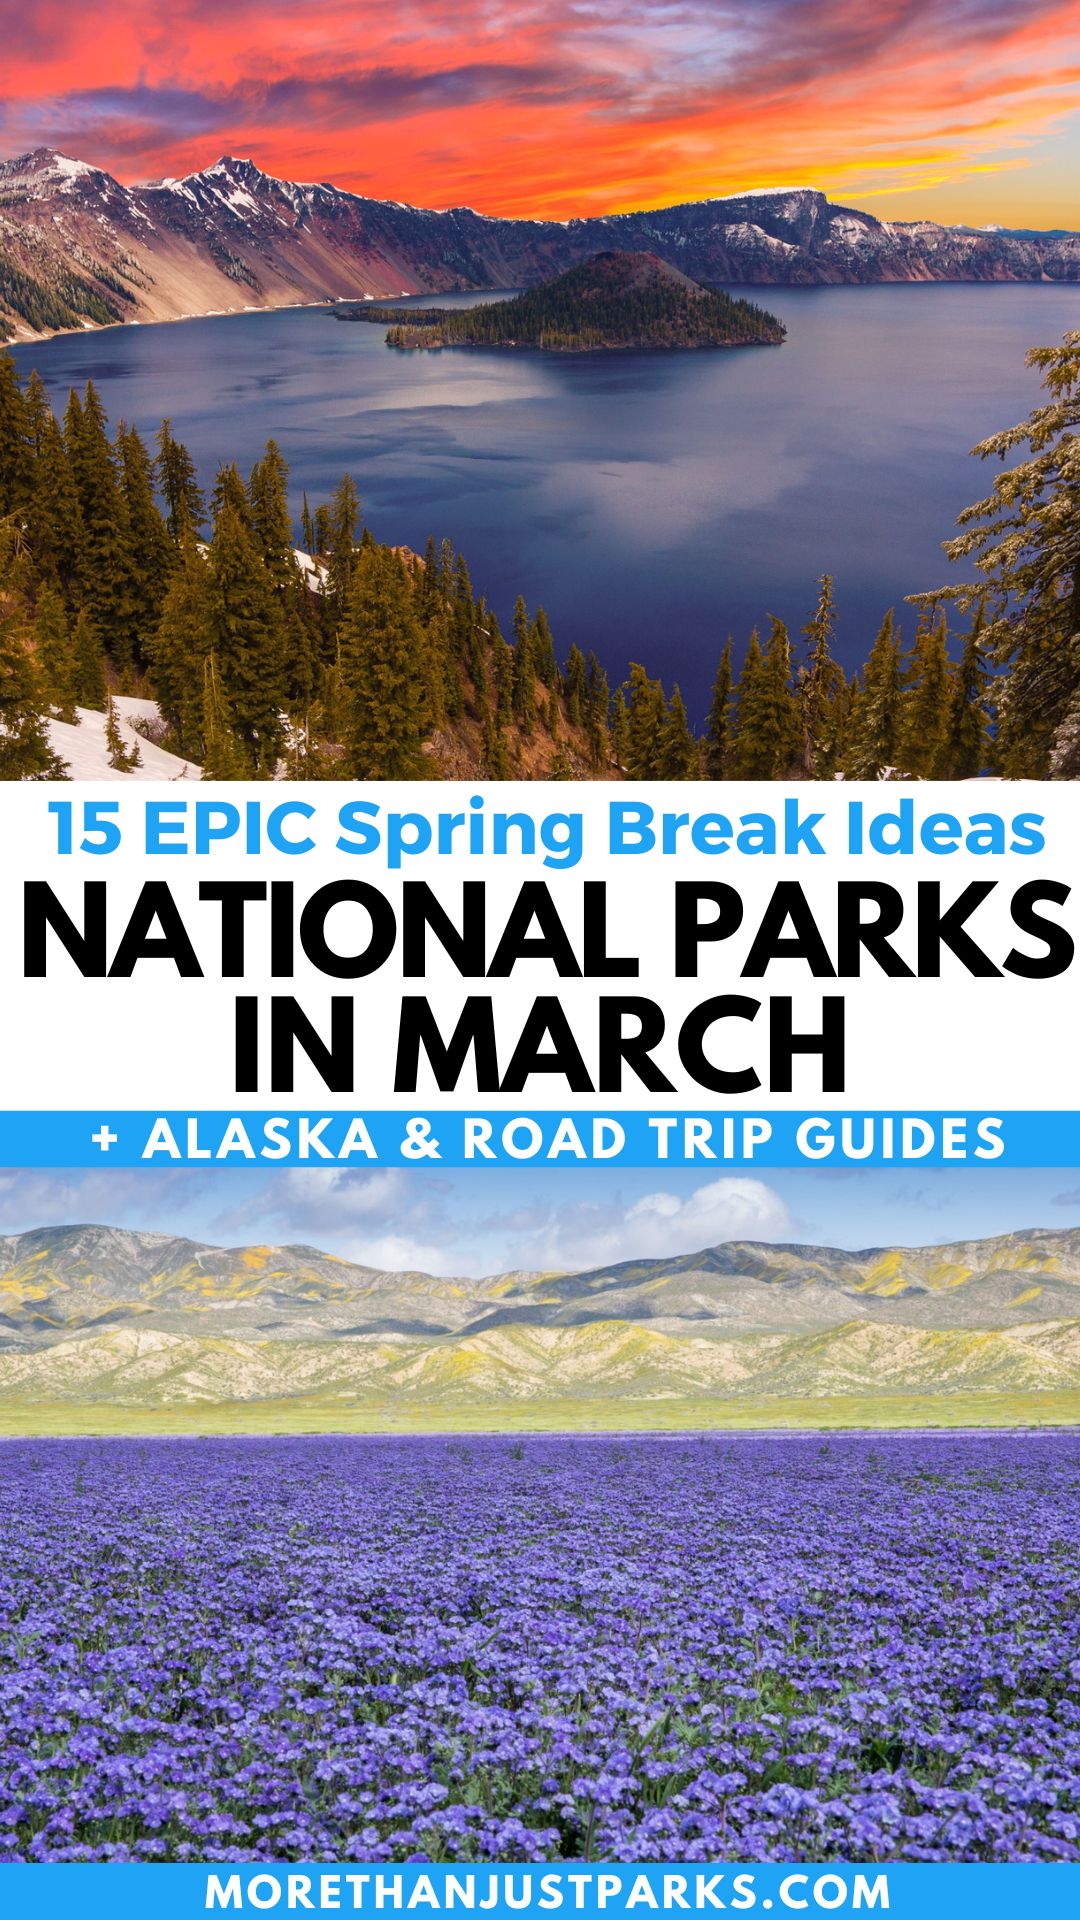 Spring Break Ideas for National Parks in March Graphic